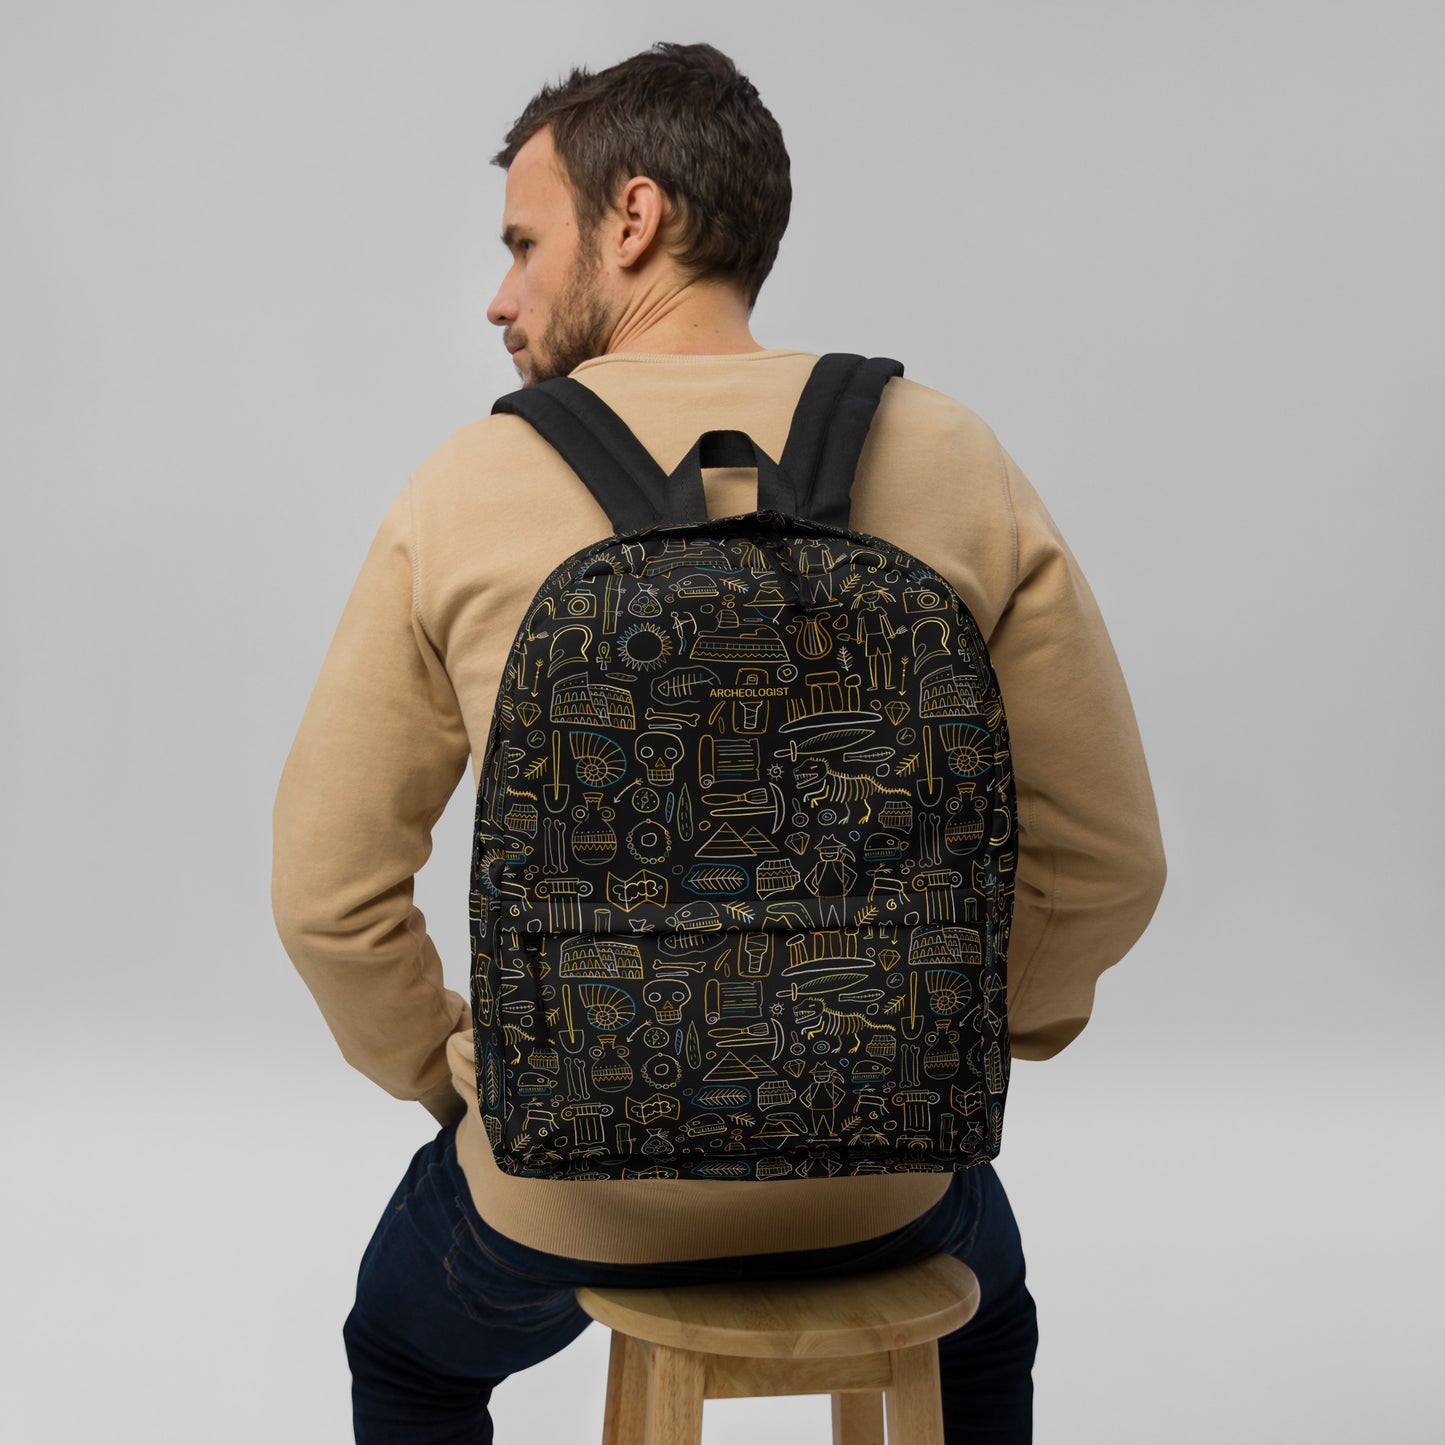 Man with Personalised Backpack for Archeology lover, stylish designer print on black. Basic text you can change - Archeologist